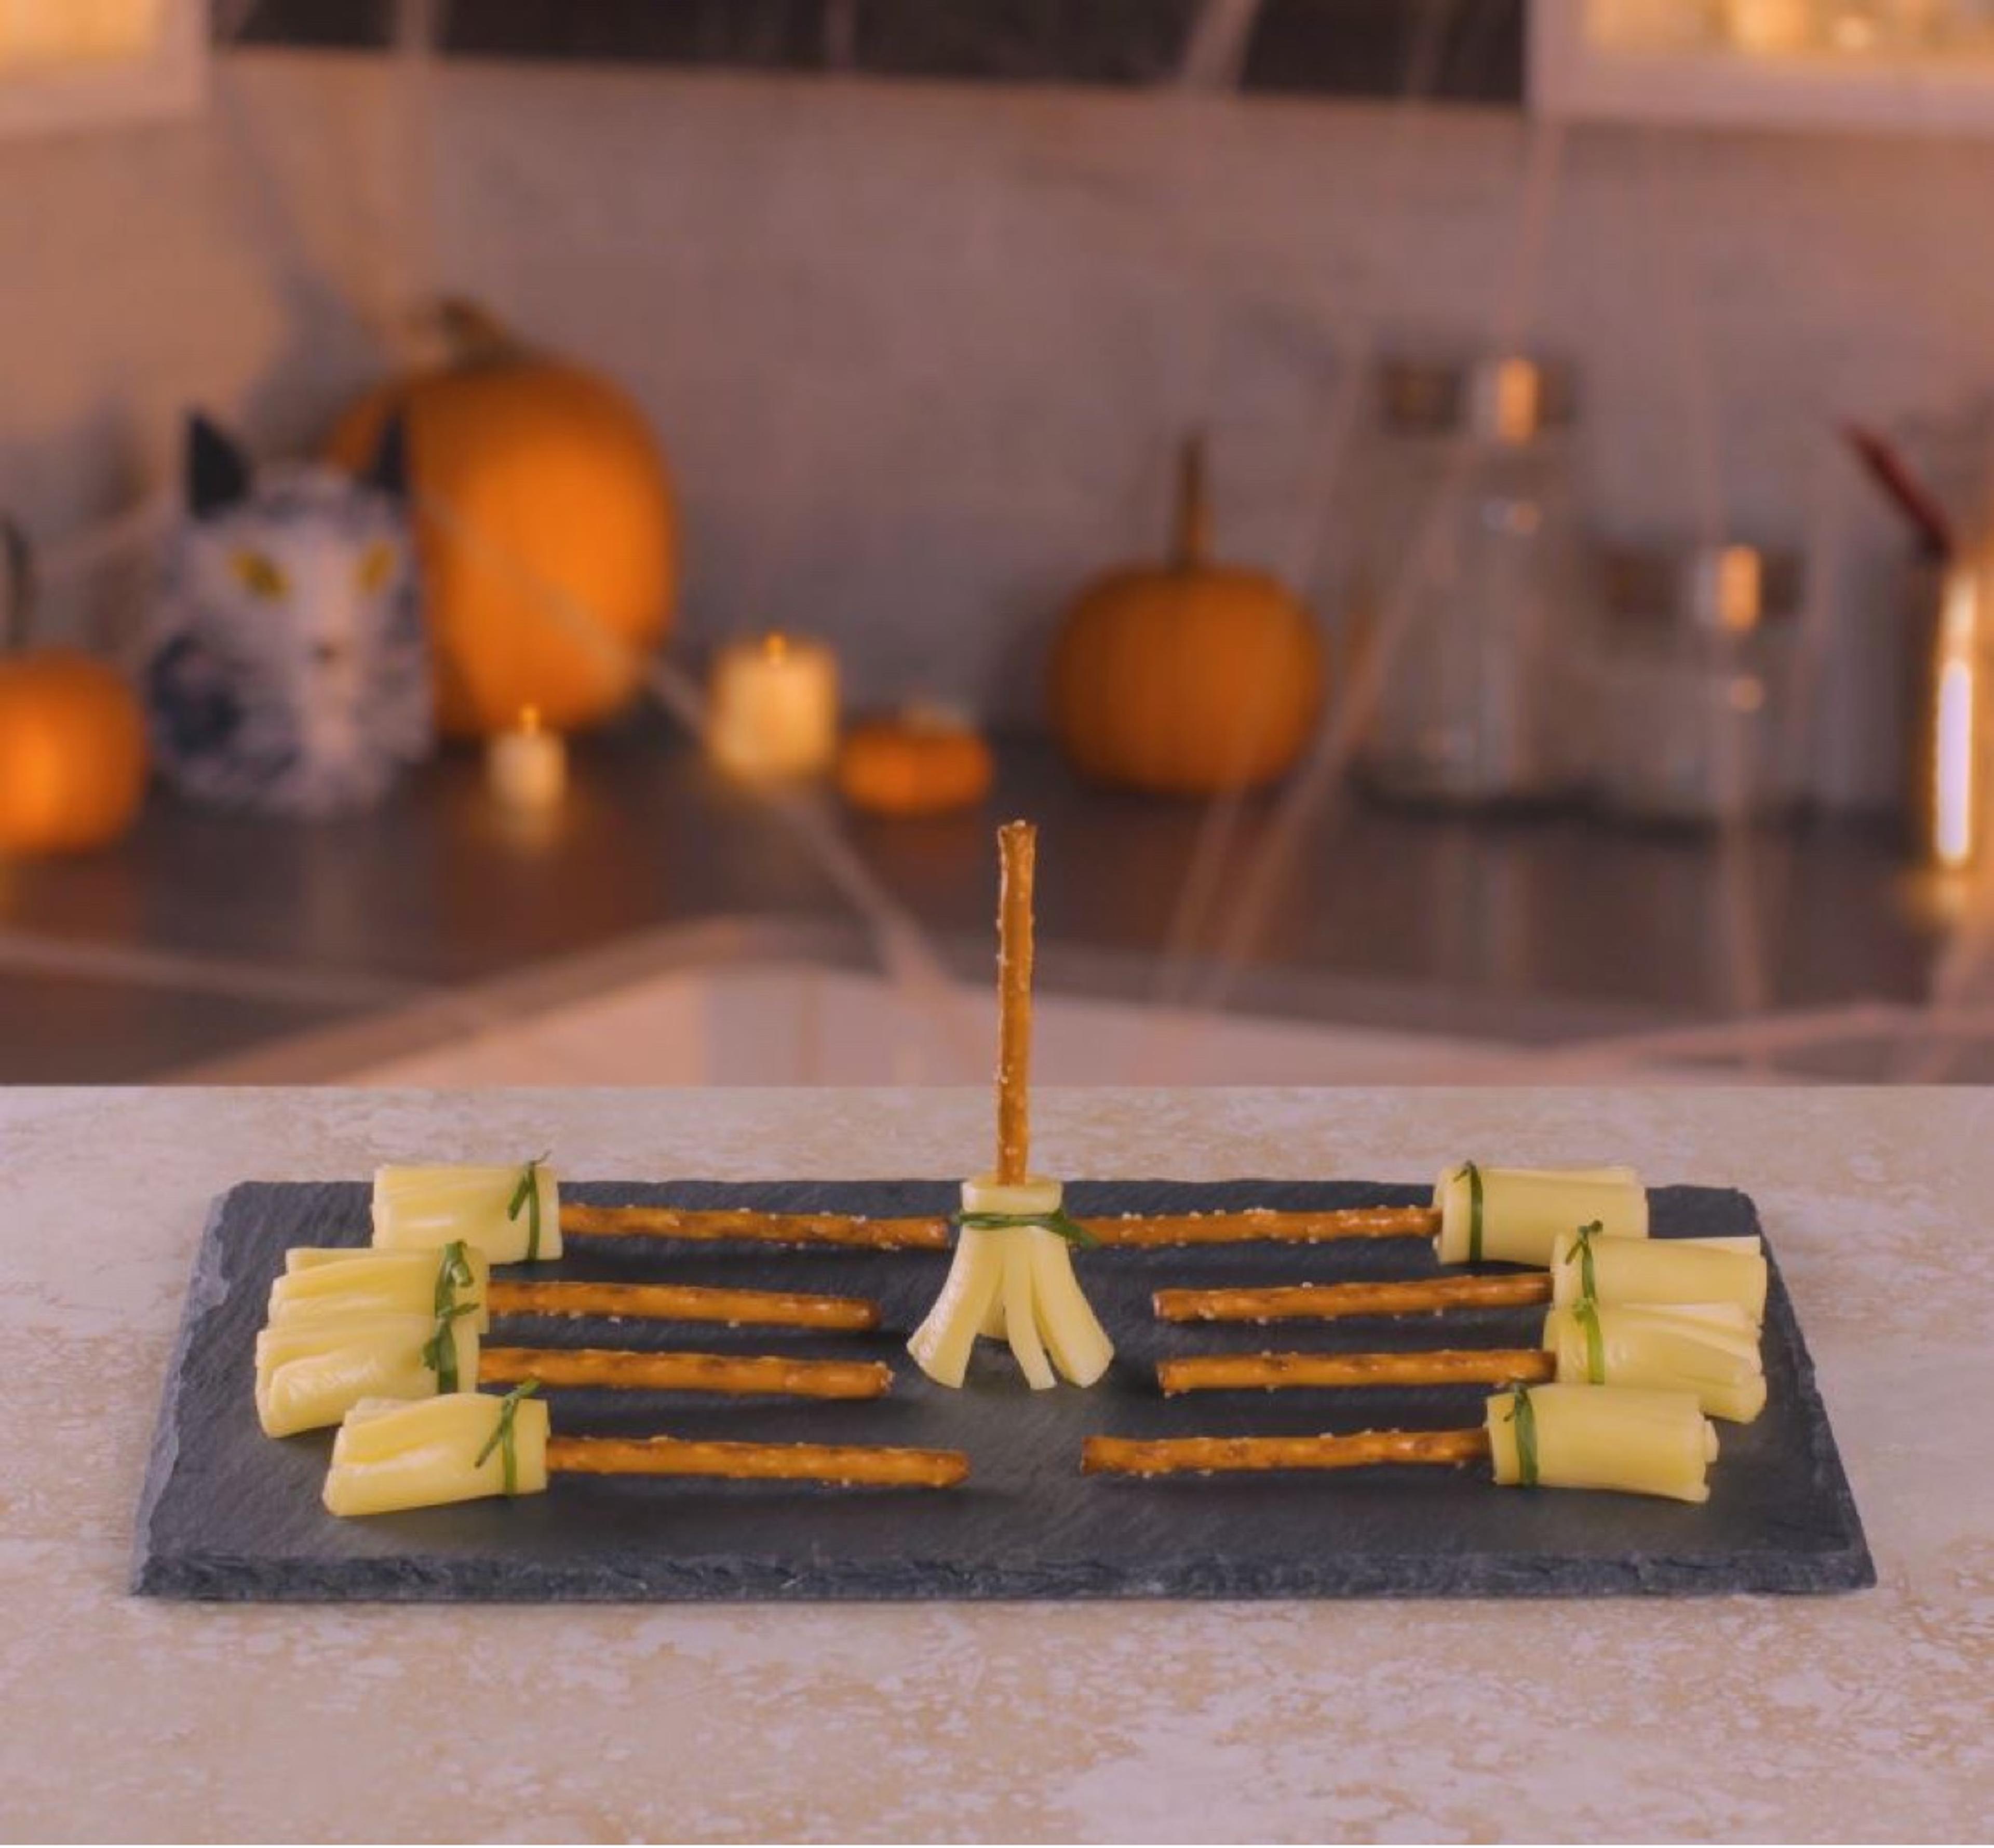 Nine fully assembled string cheese pretzel broomsticks displayed on a slate tray with fall decorations in the background.